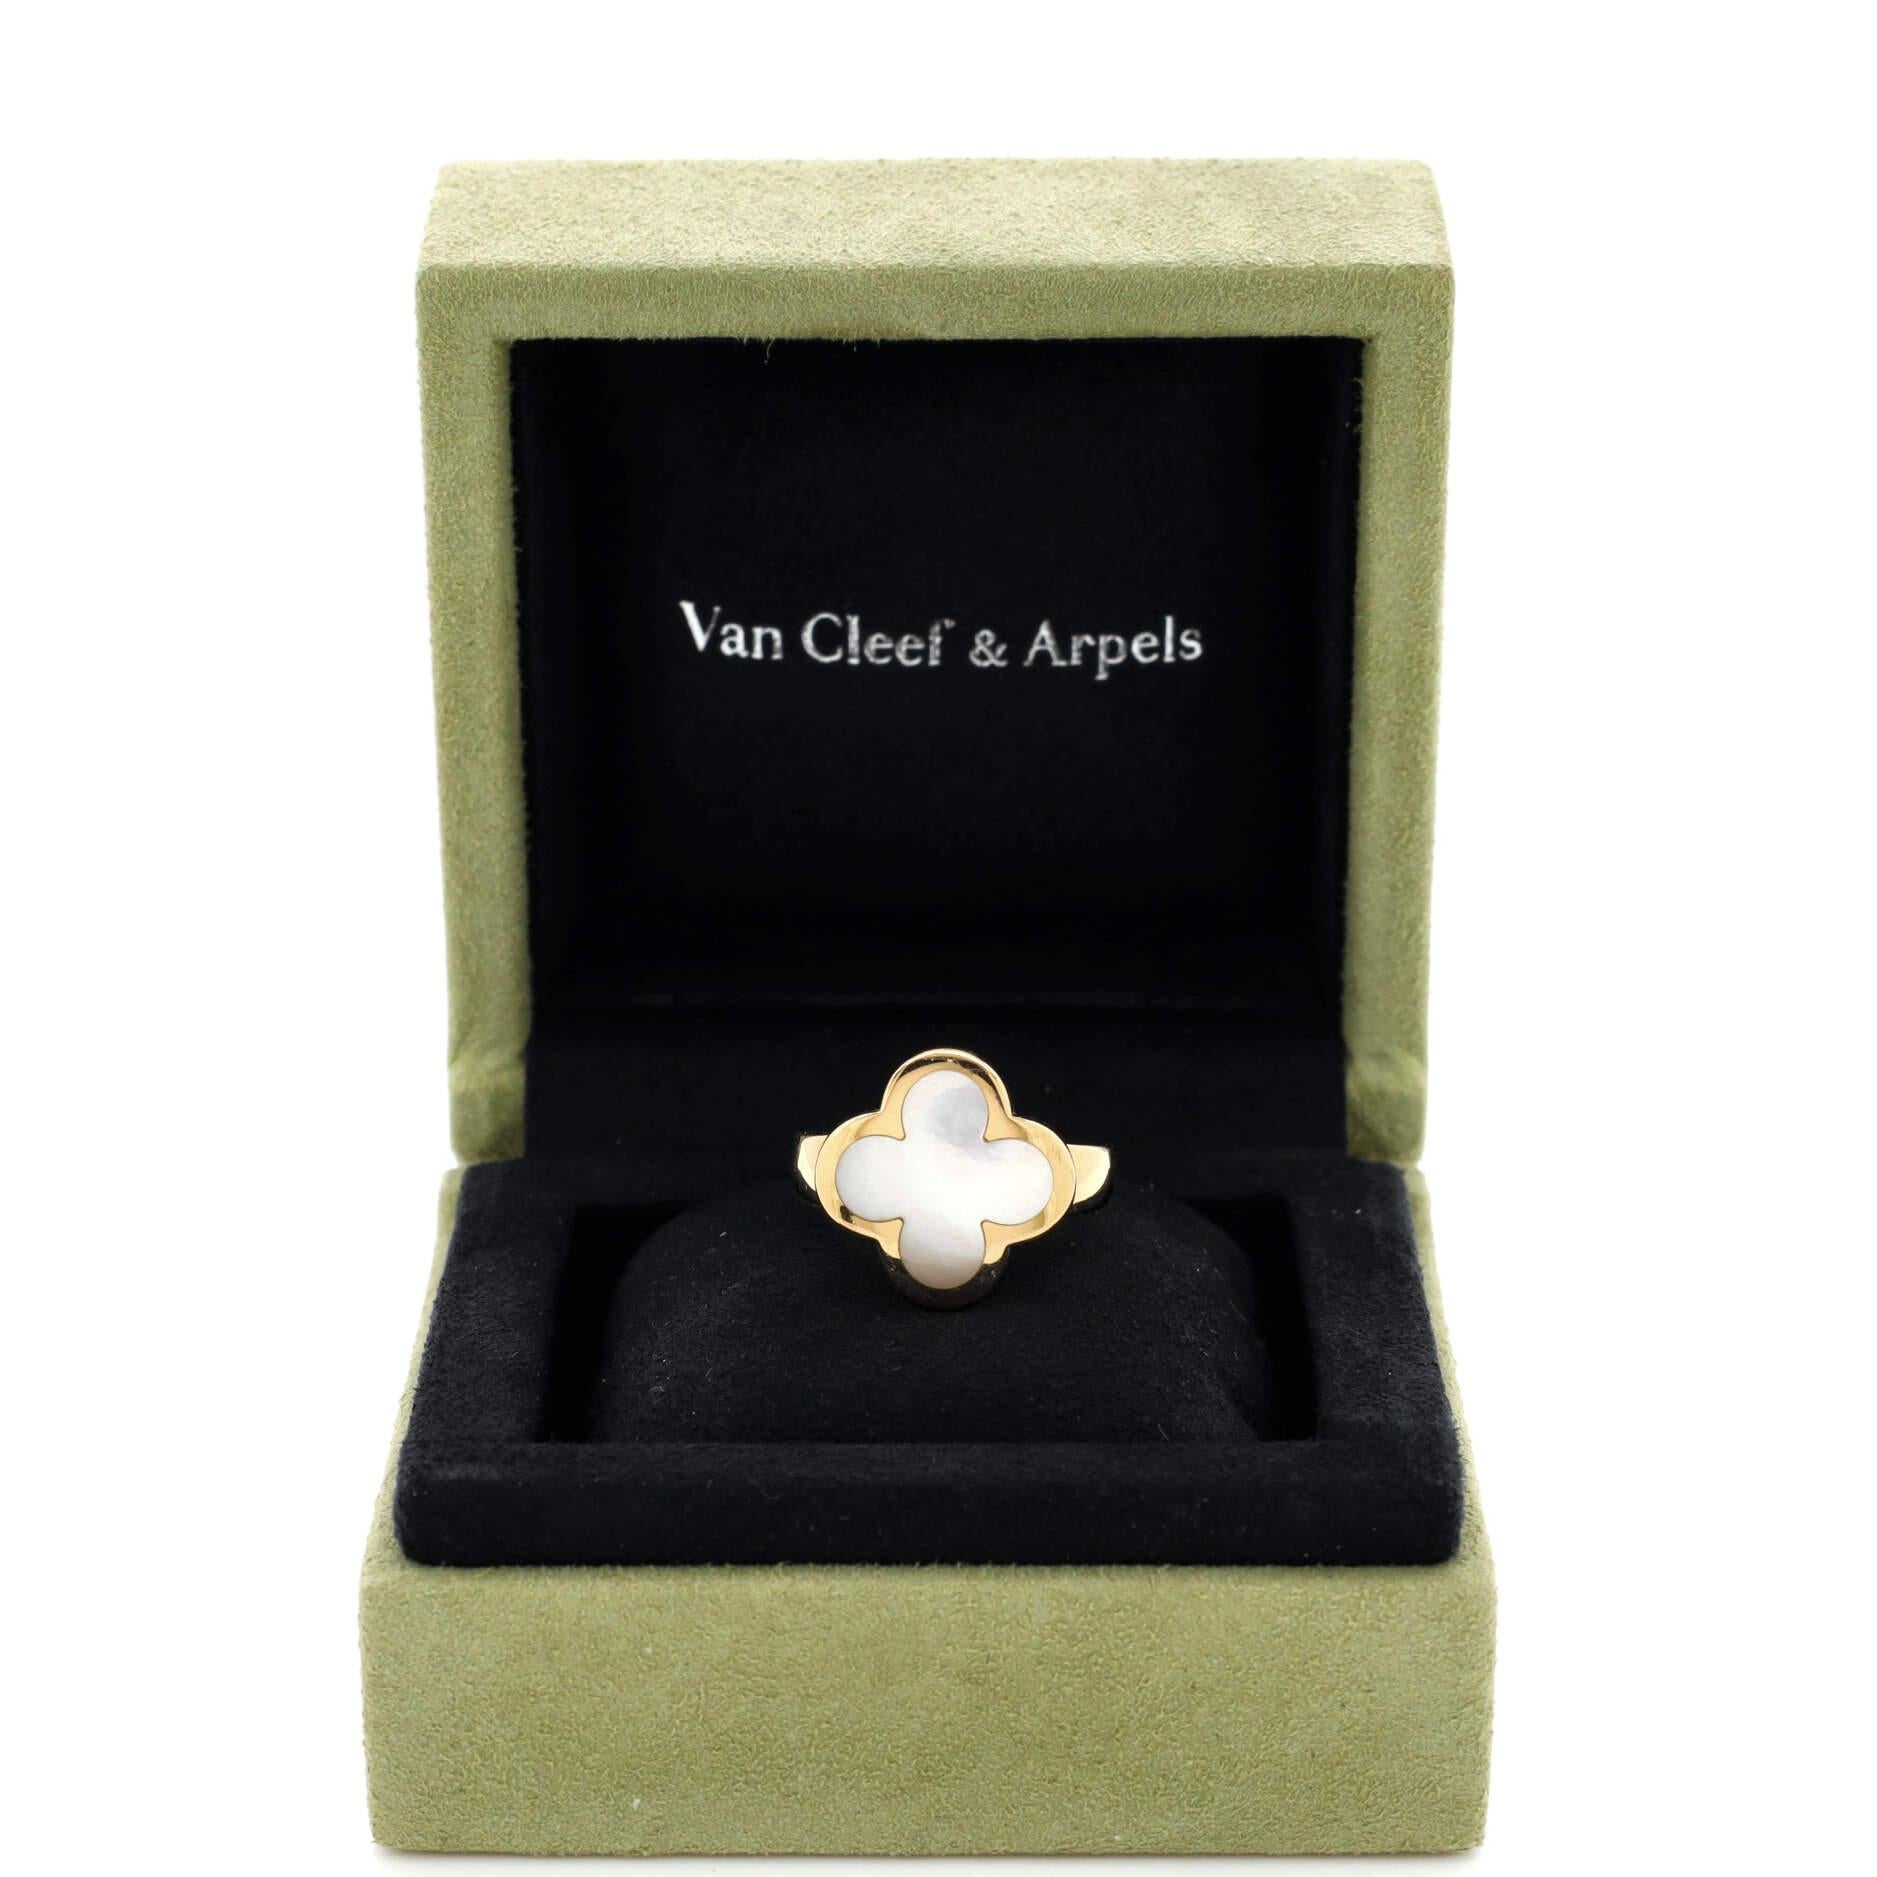 Condition: Good. Moderately heavy wear throughout.
Accessories:
Measurements: Size: 4.75 - 49, Width: 3.40 mm
Designer: Van Cleef & Arpels
Model: Pure Alhambra Ring 18K Yellow Gold and Mother of Pearl
Exterior Color: Yellow Gold
Item Number: 224640/5